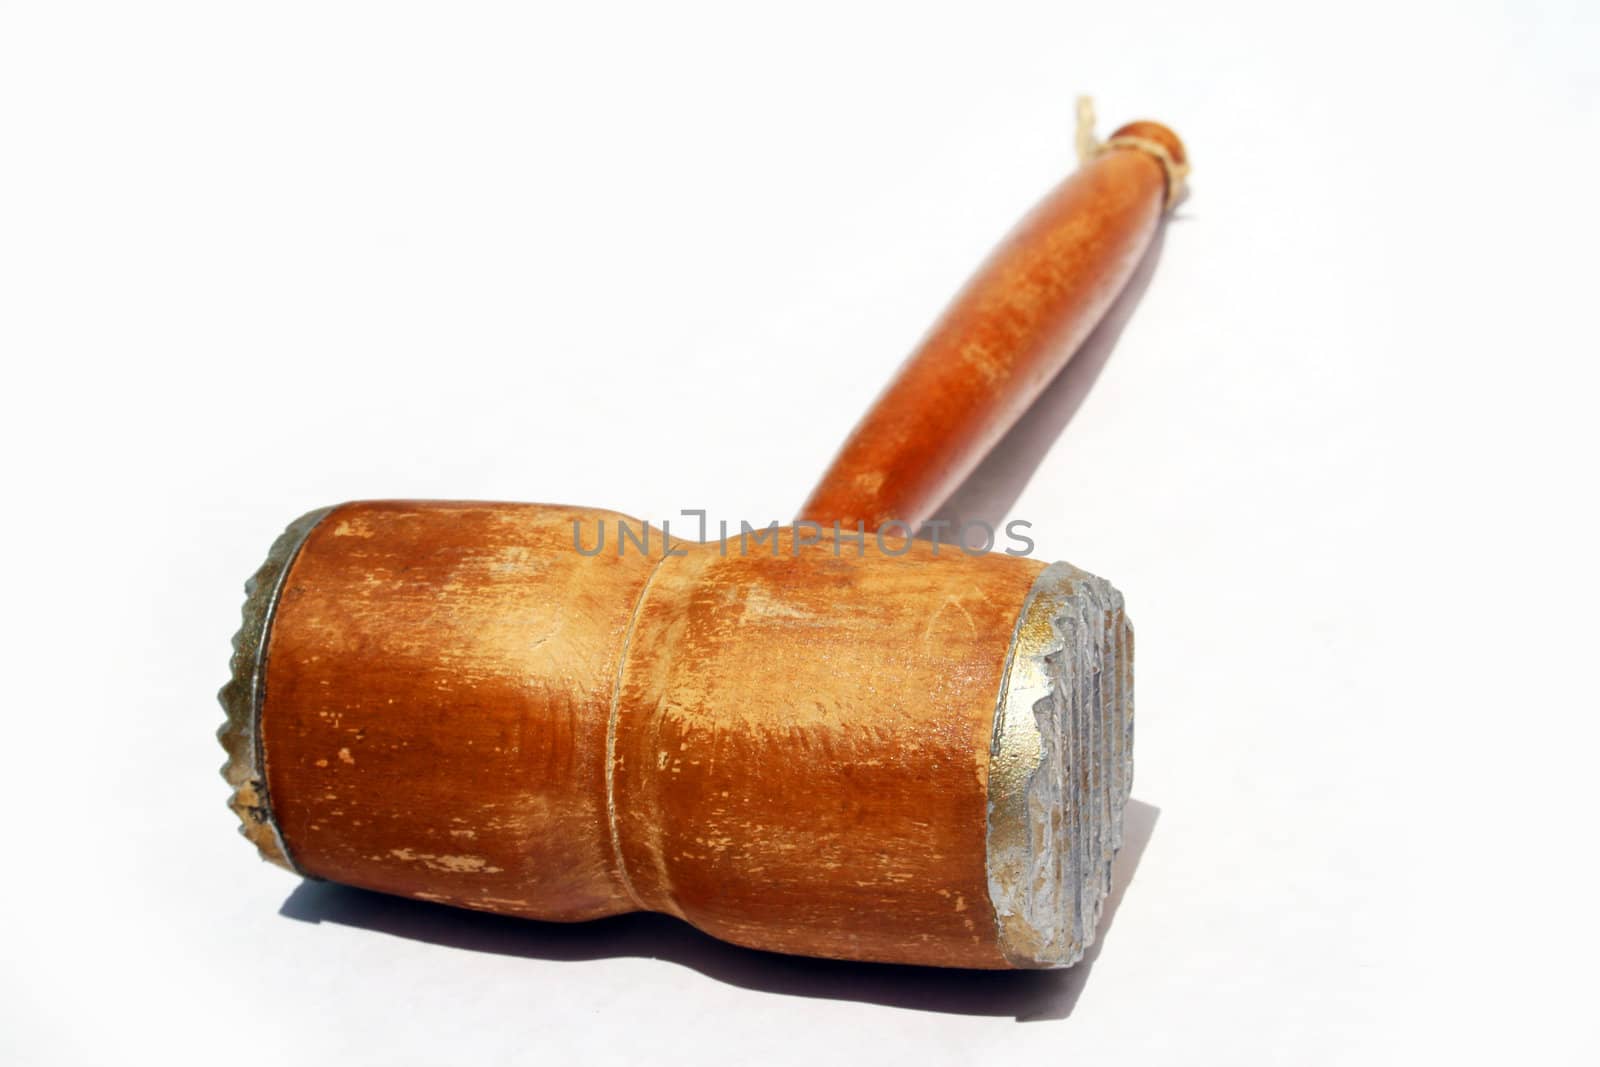 Wooden antique meat tenderizing hammer against white background